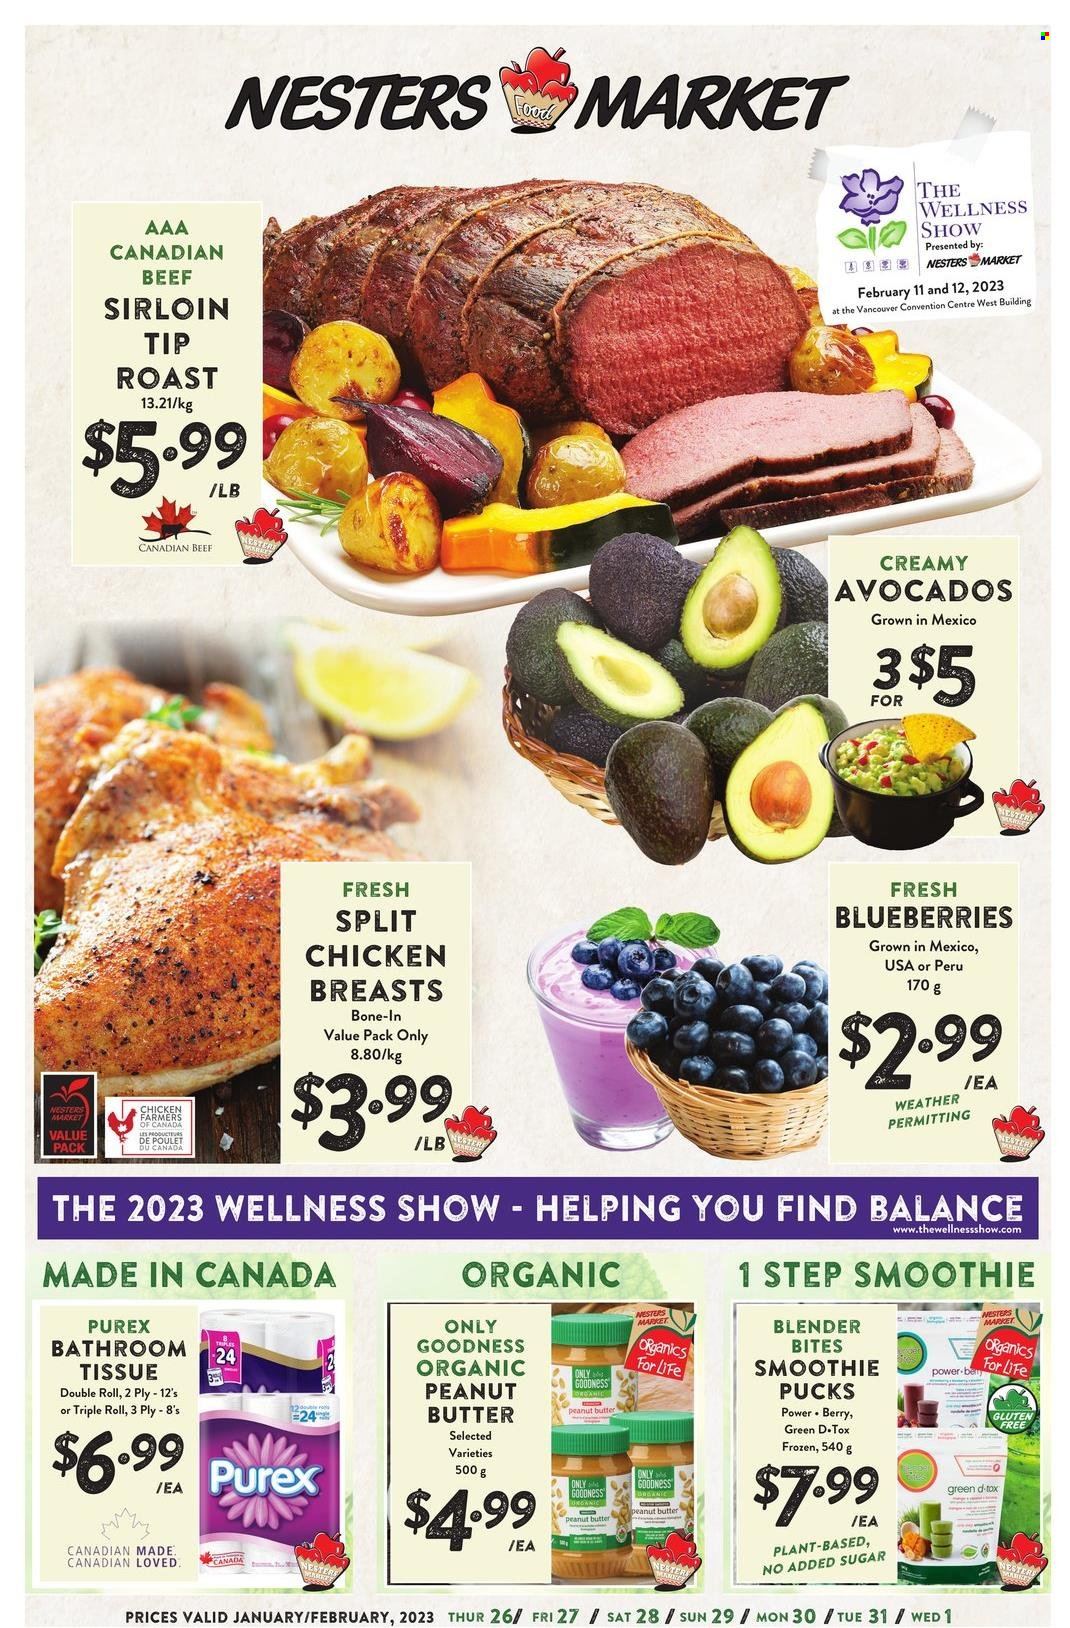 thumbnail - Nesters Food Market Flyer - January 26, 2023 - February 01, 2023 - Sales products - avocado, blueberries, peanut butter, chicken breasts, beef meat, beef sirloin, bath tissue, Purex. Page 1.